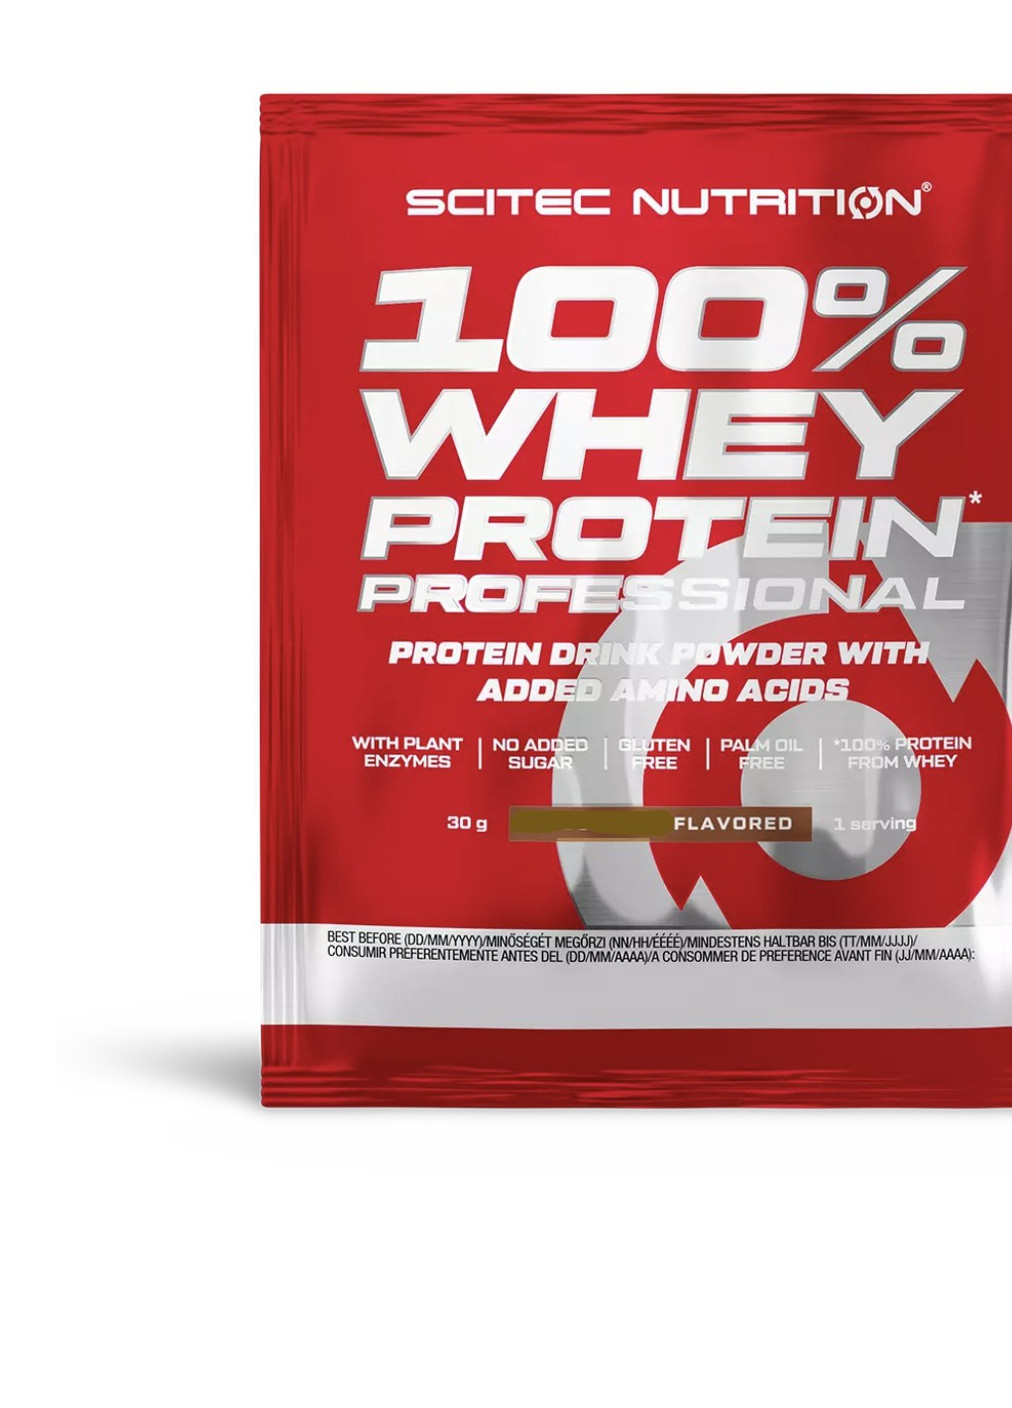 Протеин Whey Protein Professional 30g (Salted caramel) Scitec Nutrition (256718293)